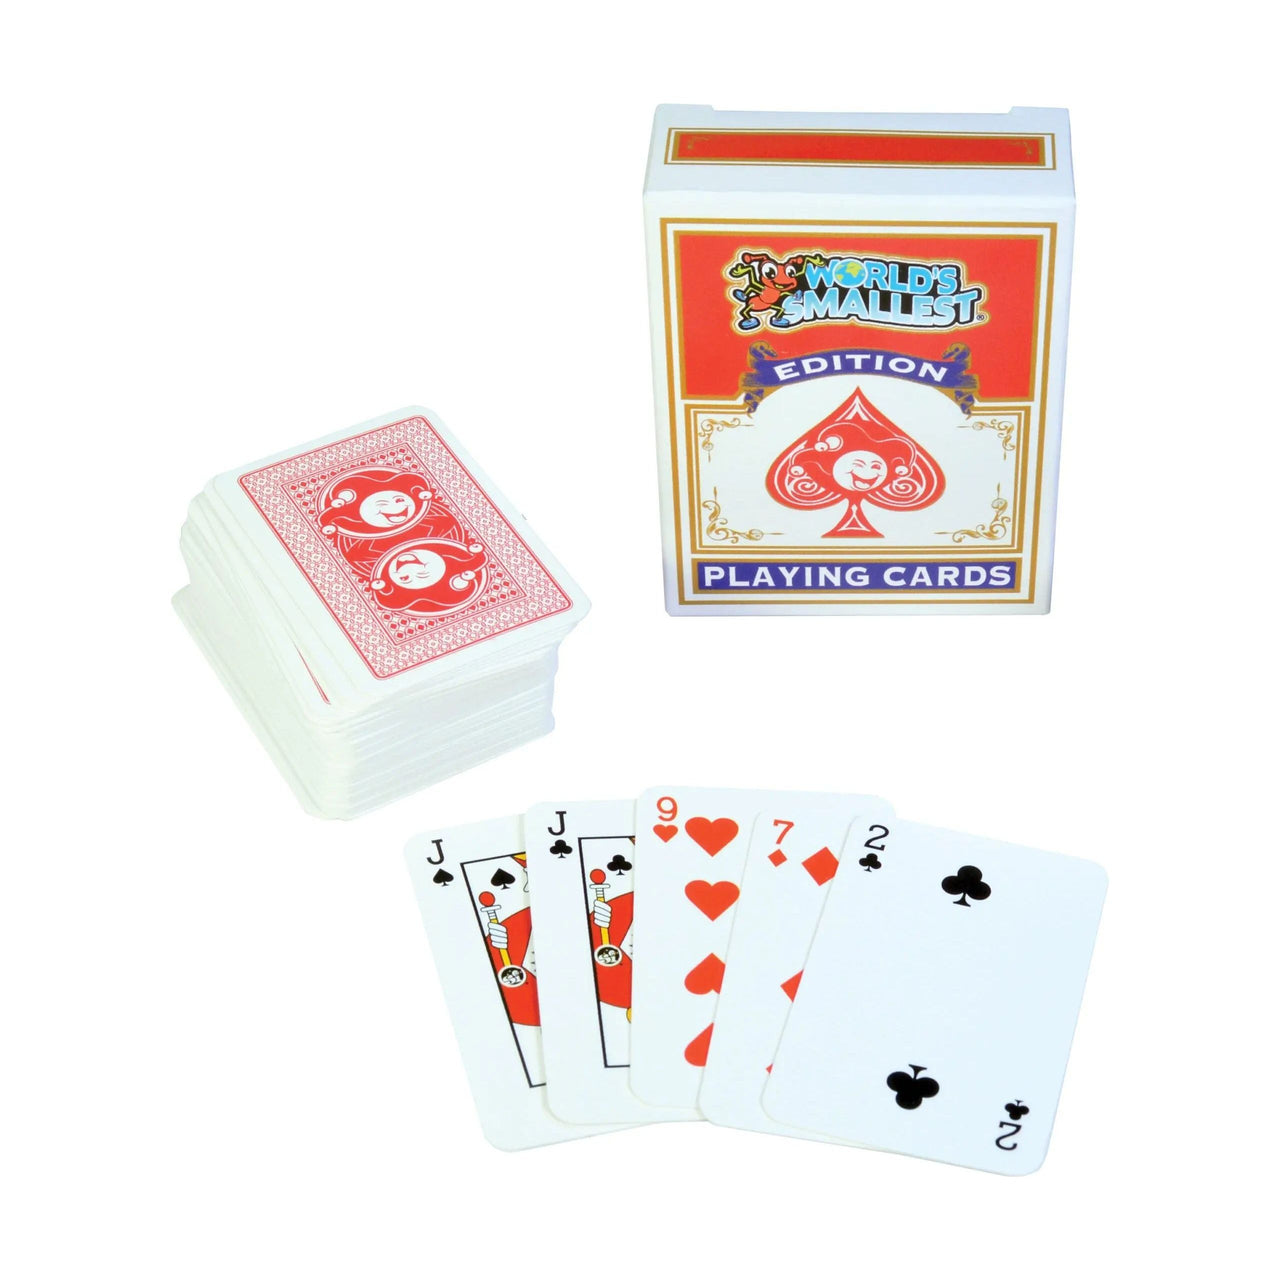 World's Smallest Playing Cards World's Smallest